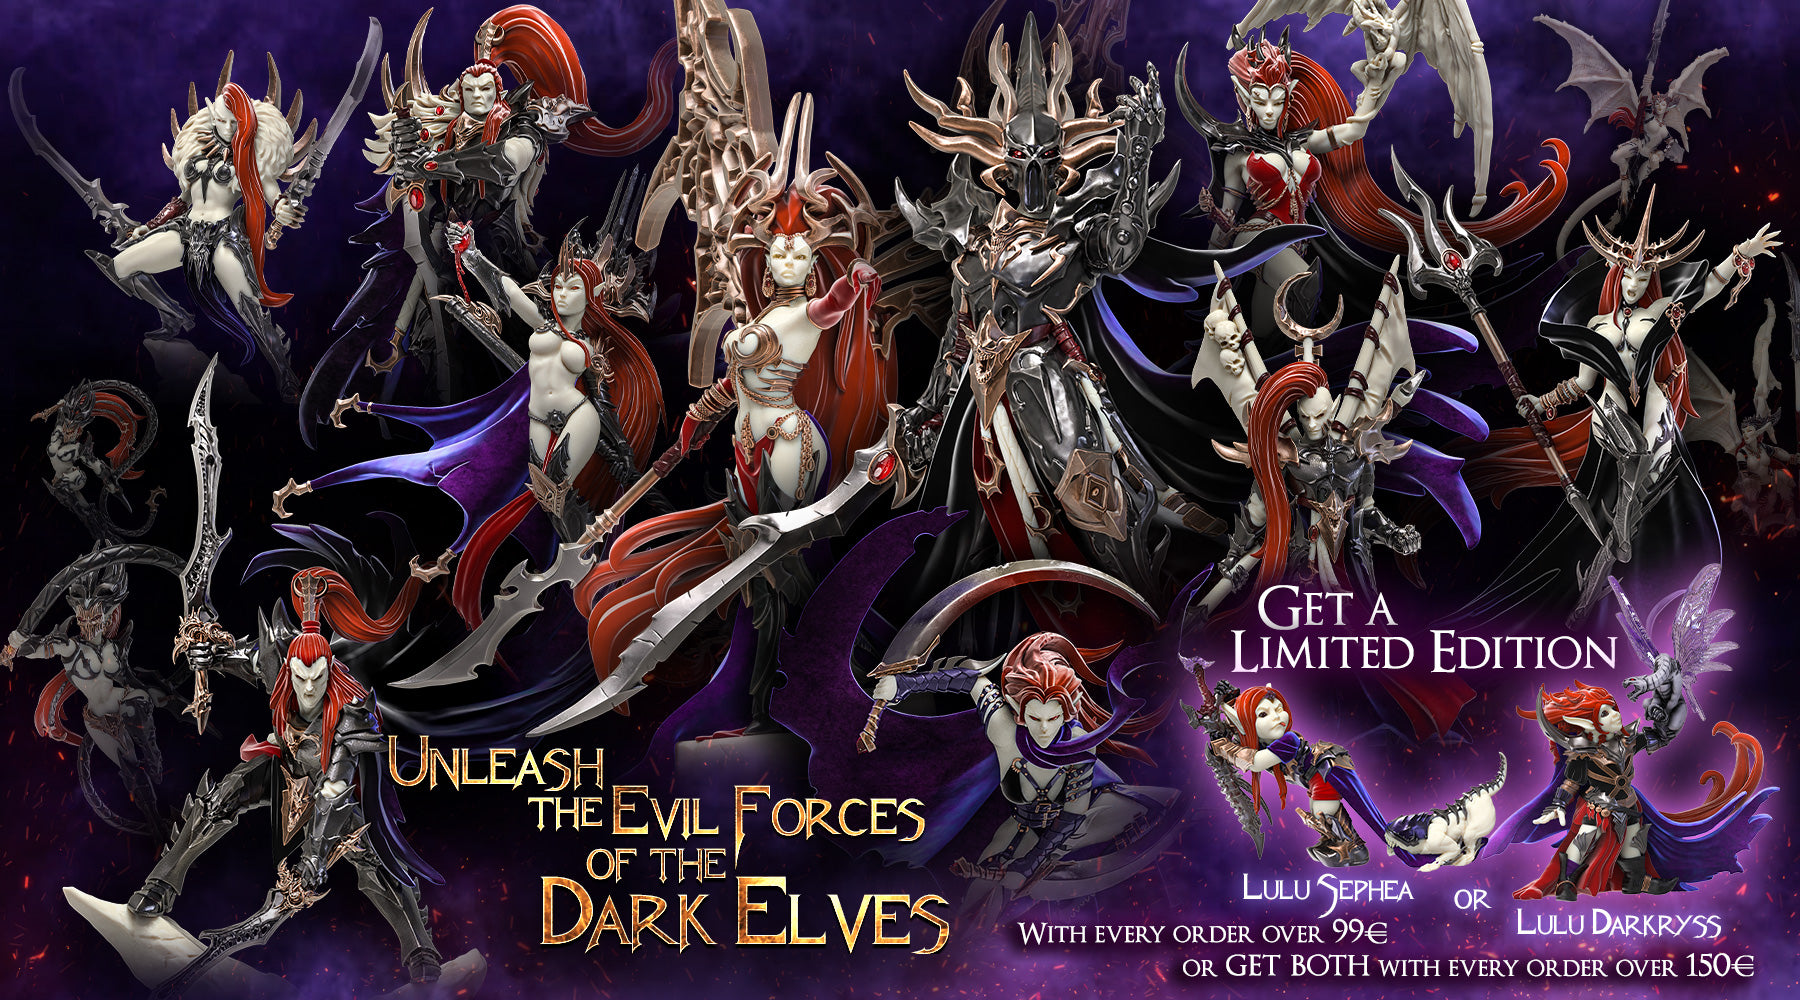 Bolster up your fantasy armies with the Dark Elves